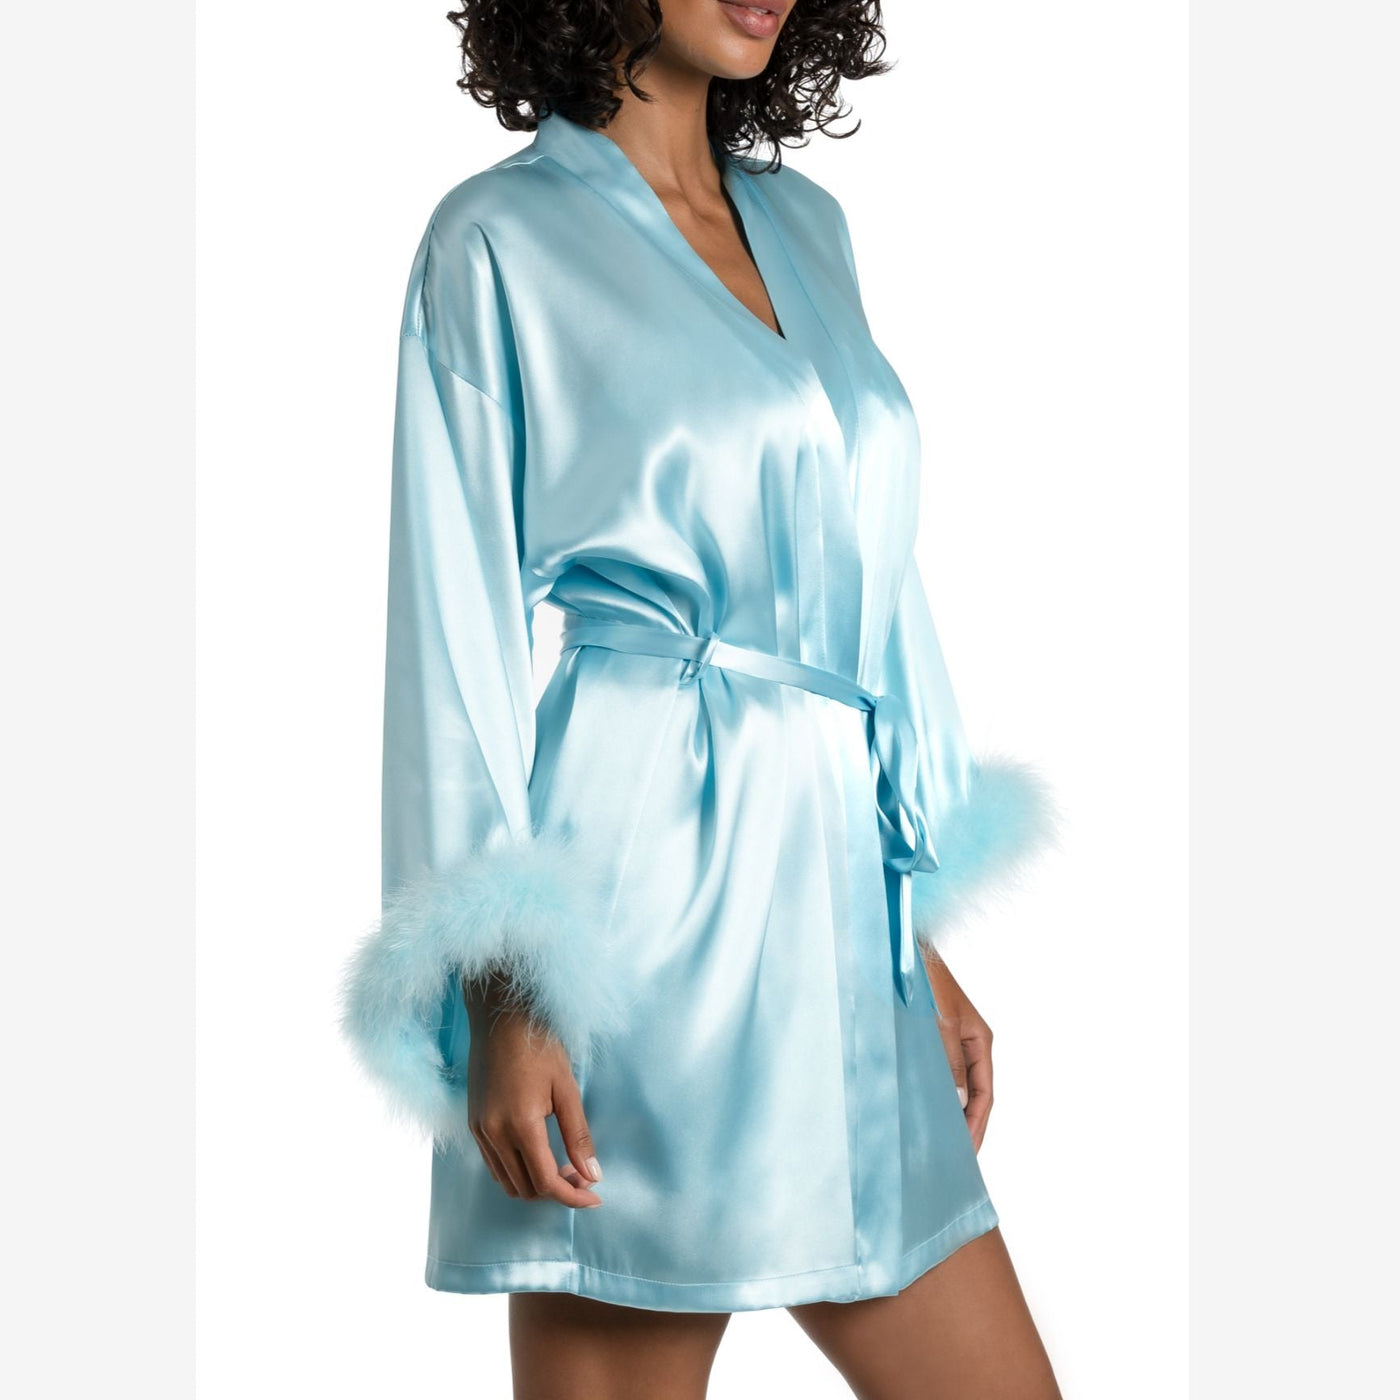 Jonquil Casablanca Wrap CBC031 in Pale Aqua-Robes-Jonquil in Bloom-Pale Aqua-XSmall/Small-Anna Bella Fine Lingerie, Reveal Your Most Gorgeous Self!